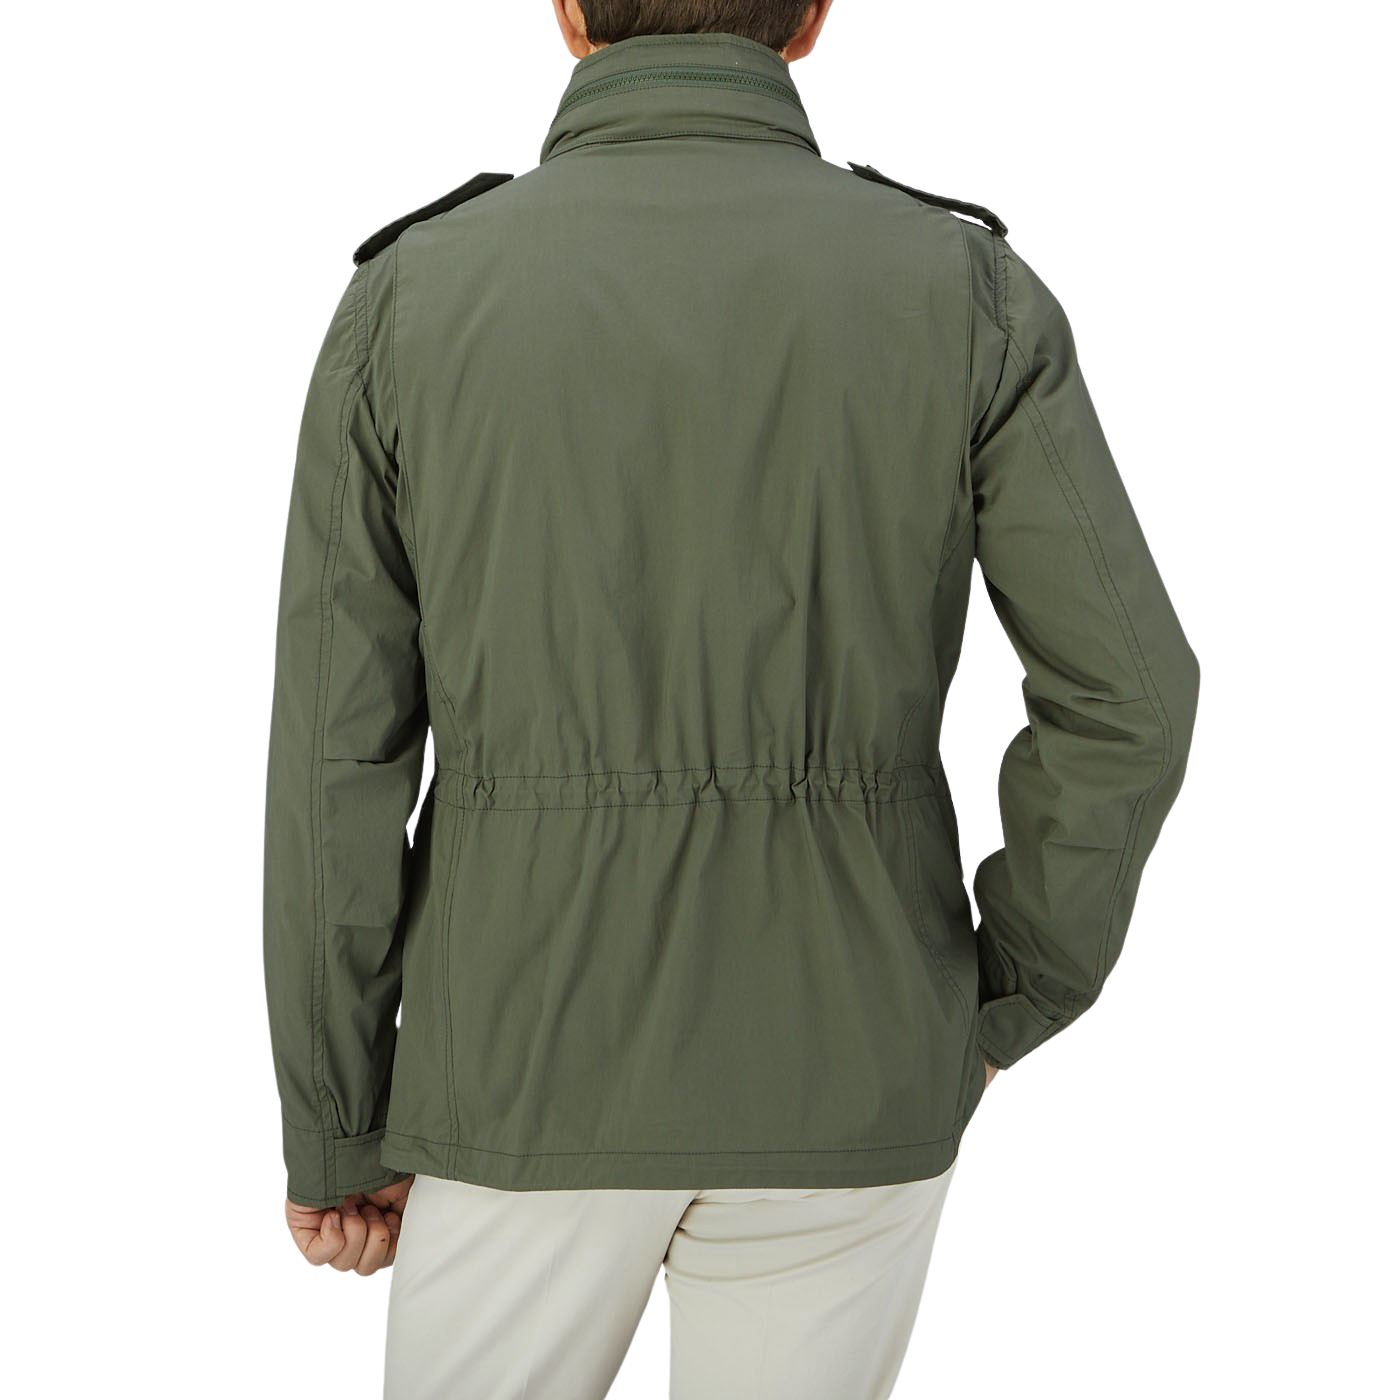 The back view of a man wearing an Aspesi M65 Field Jacket made from waterproof fabric.